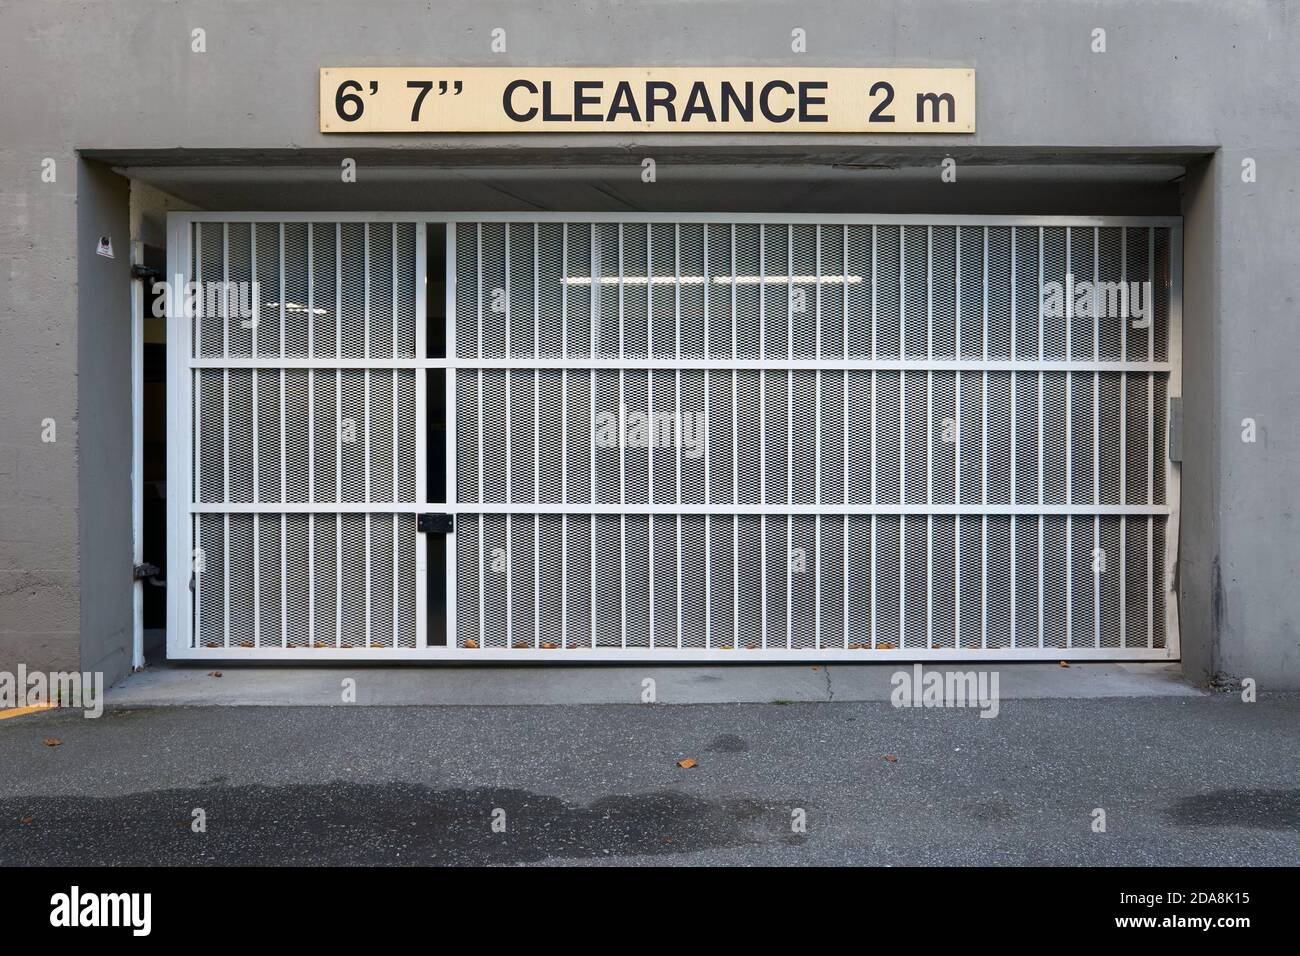 Metal car garage door with clearance height sign in both metric and imperial units, Vancouver, BC, Canada Stock Photo